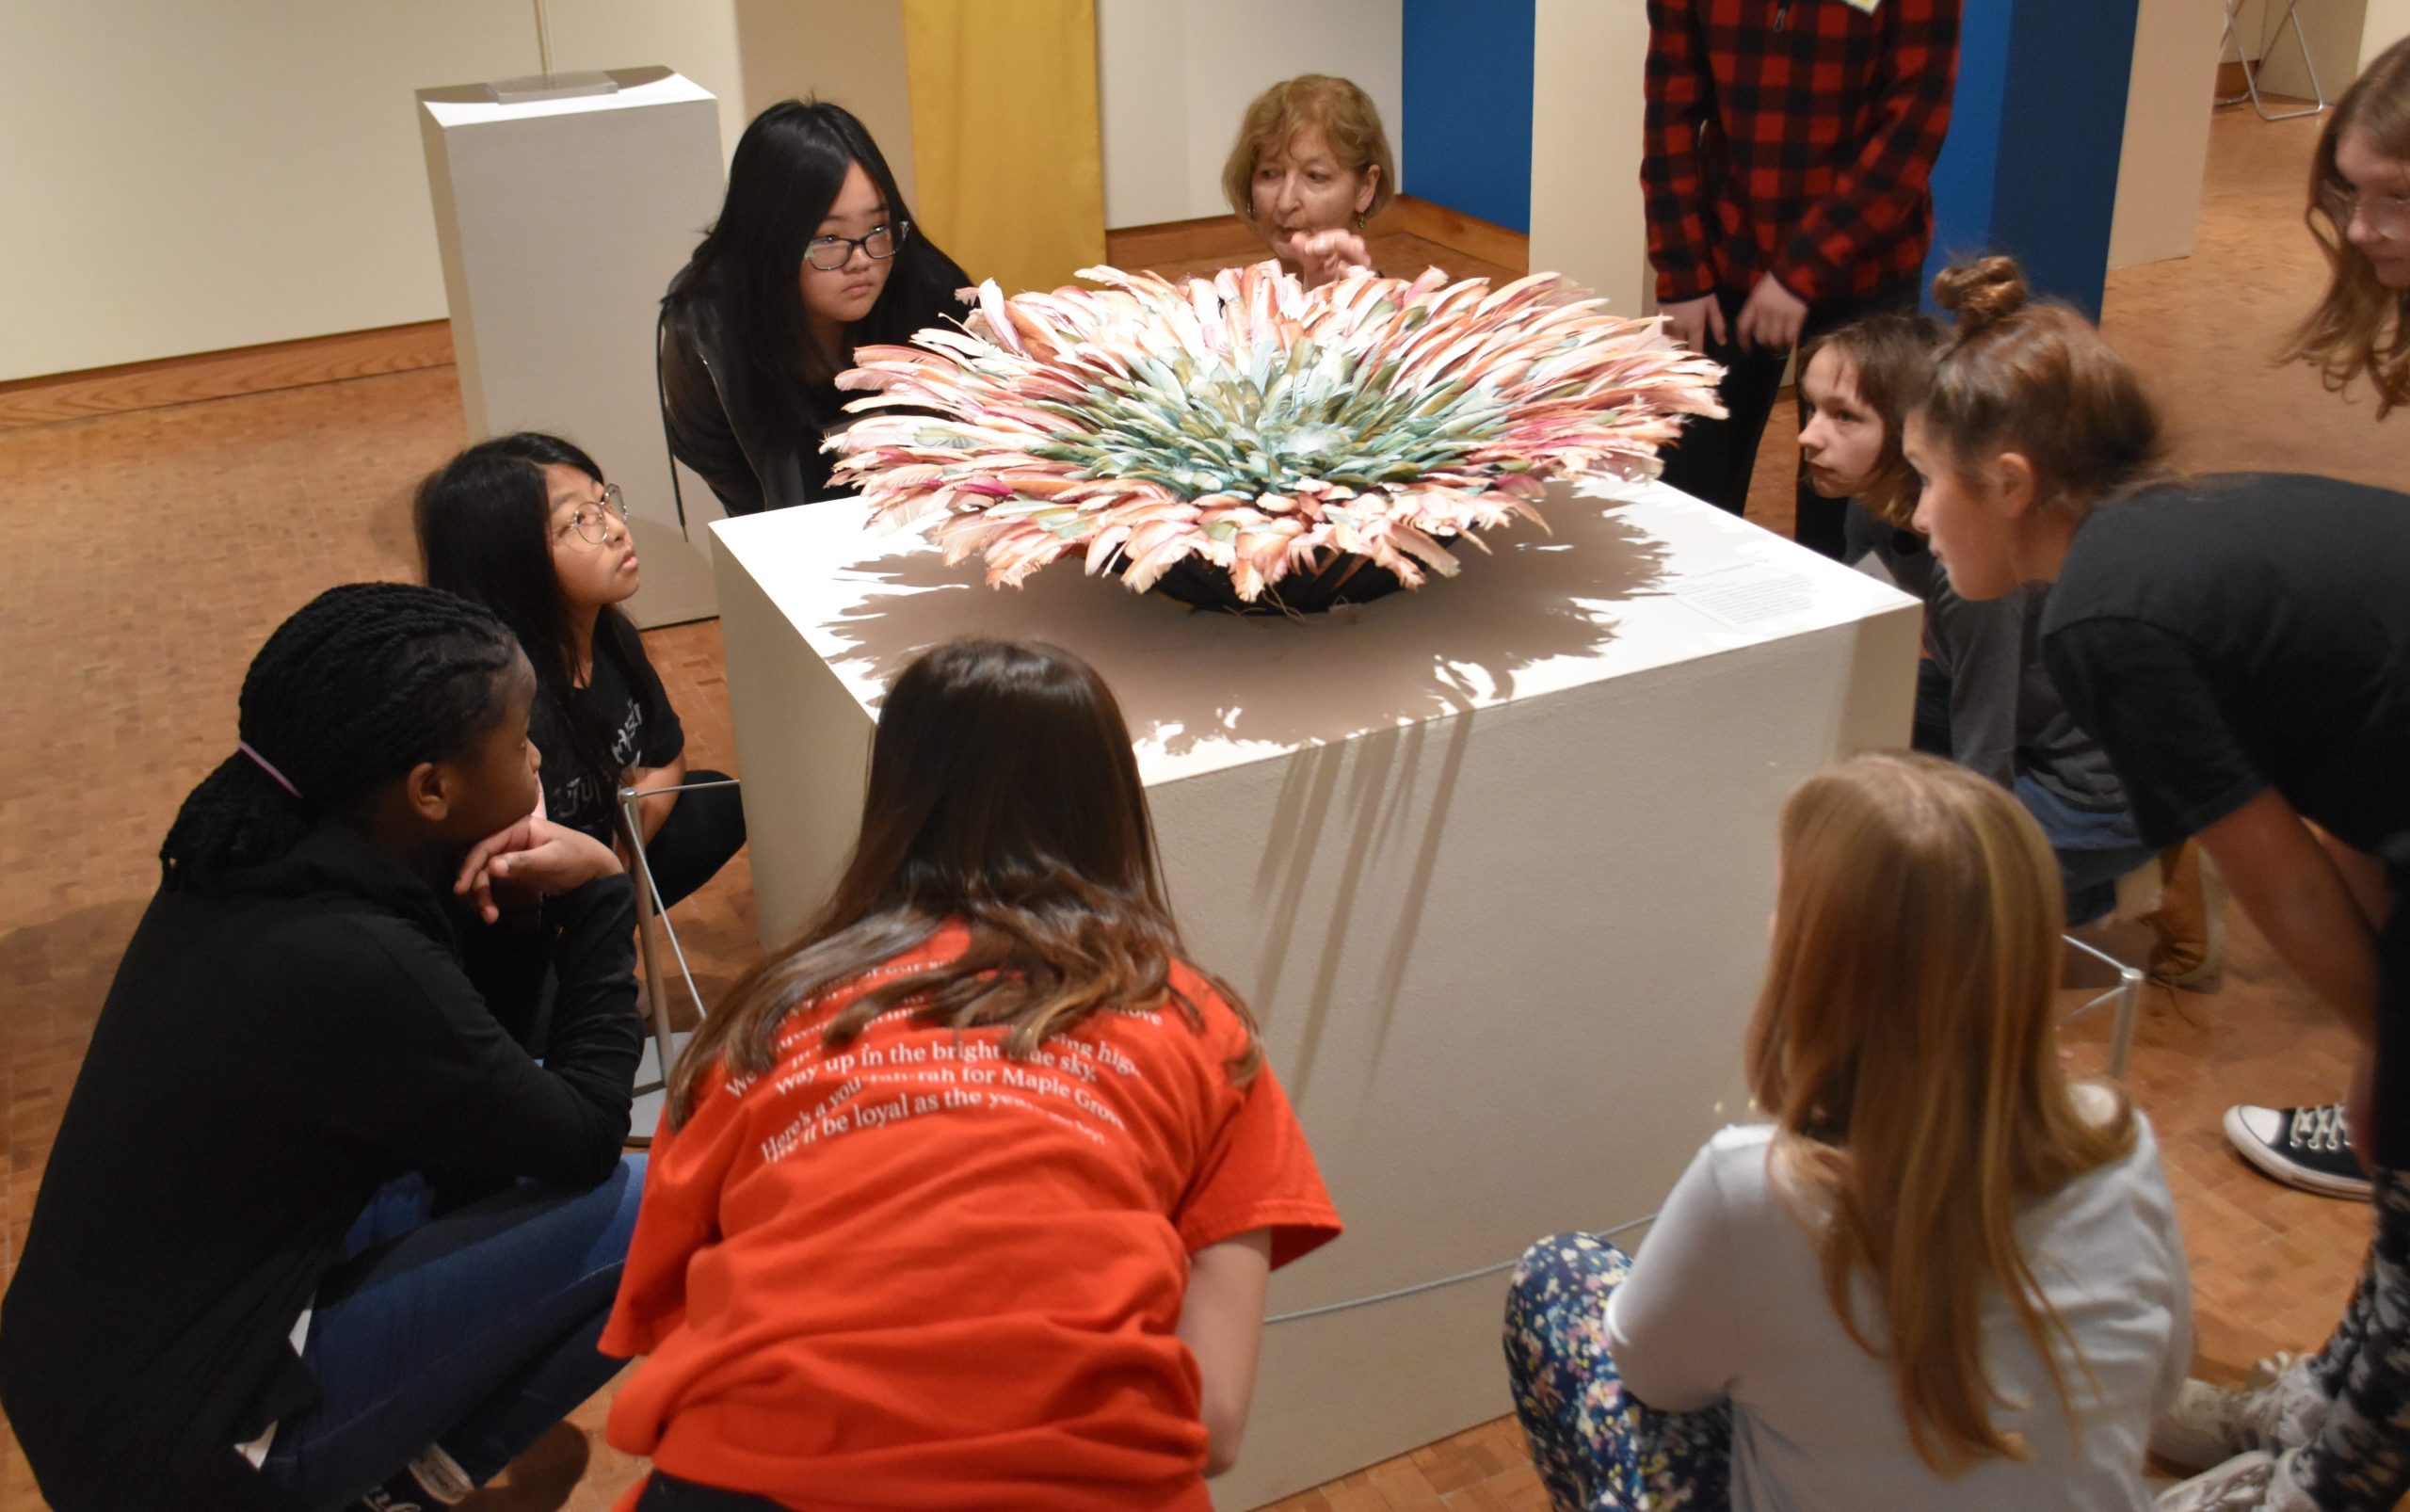 Eight students and volunteer docent crouch down to view a large, round headdress made of feathers on a pedestal in the Museum gallery.